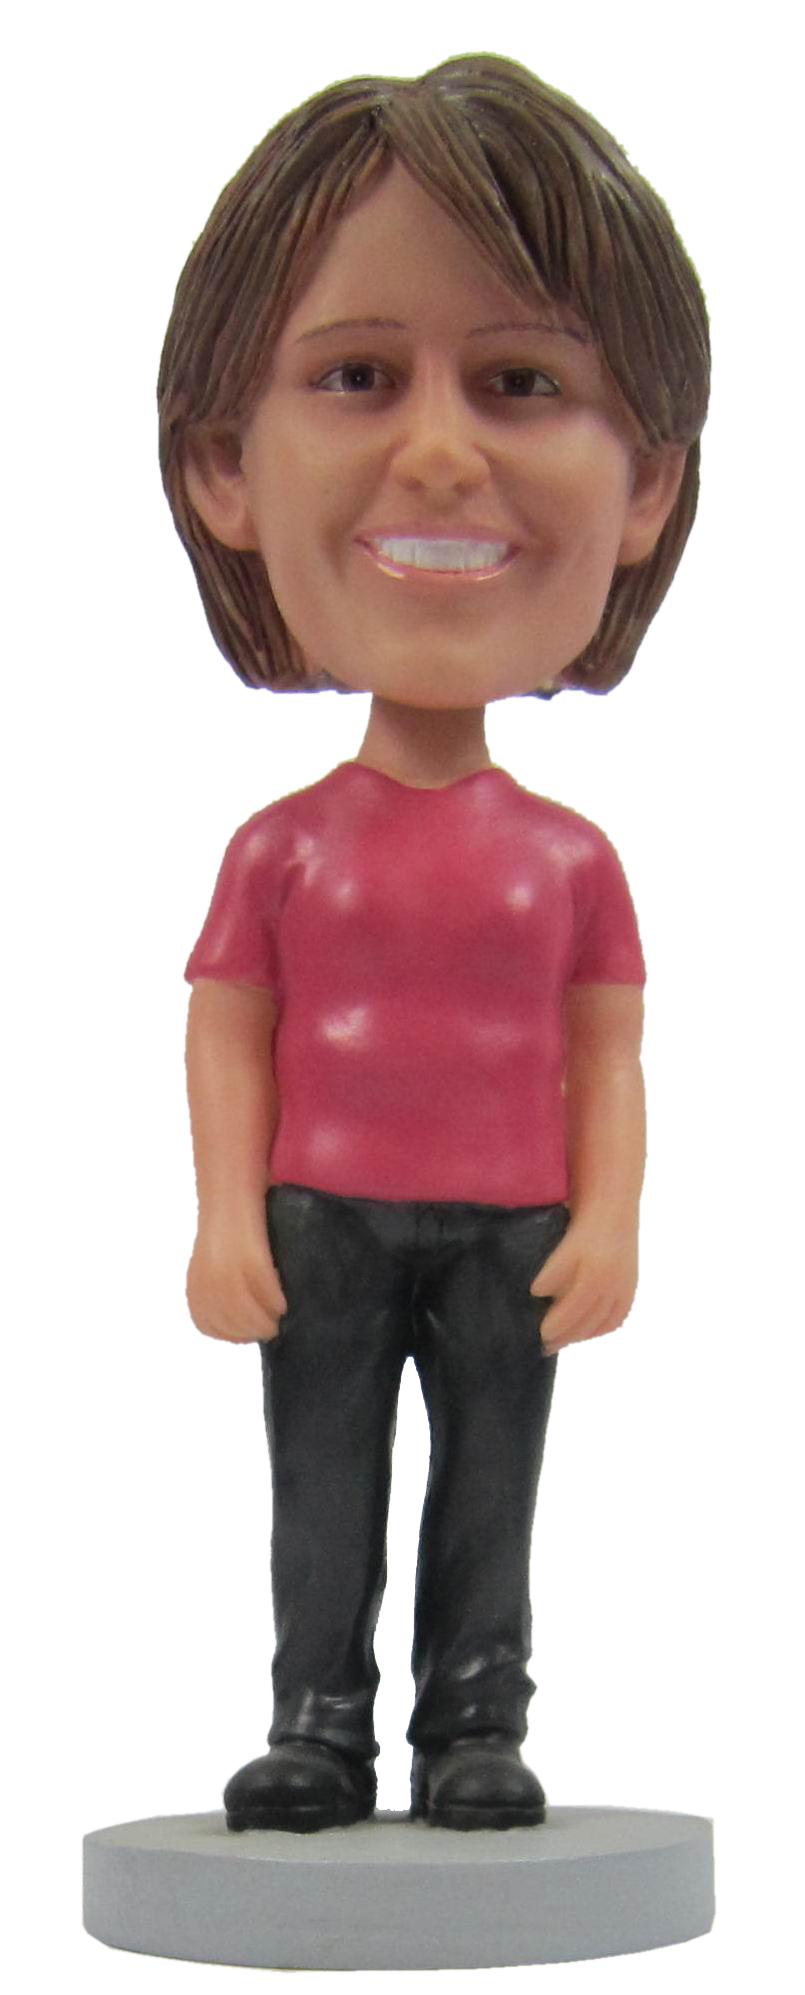 MOTHER’S DAY GIFT: A PERSONALIZED BOBBLEHEAD FROM PHOTO